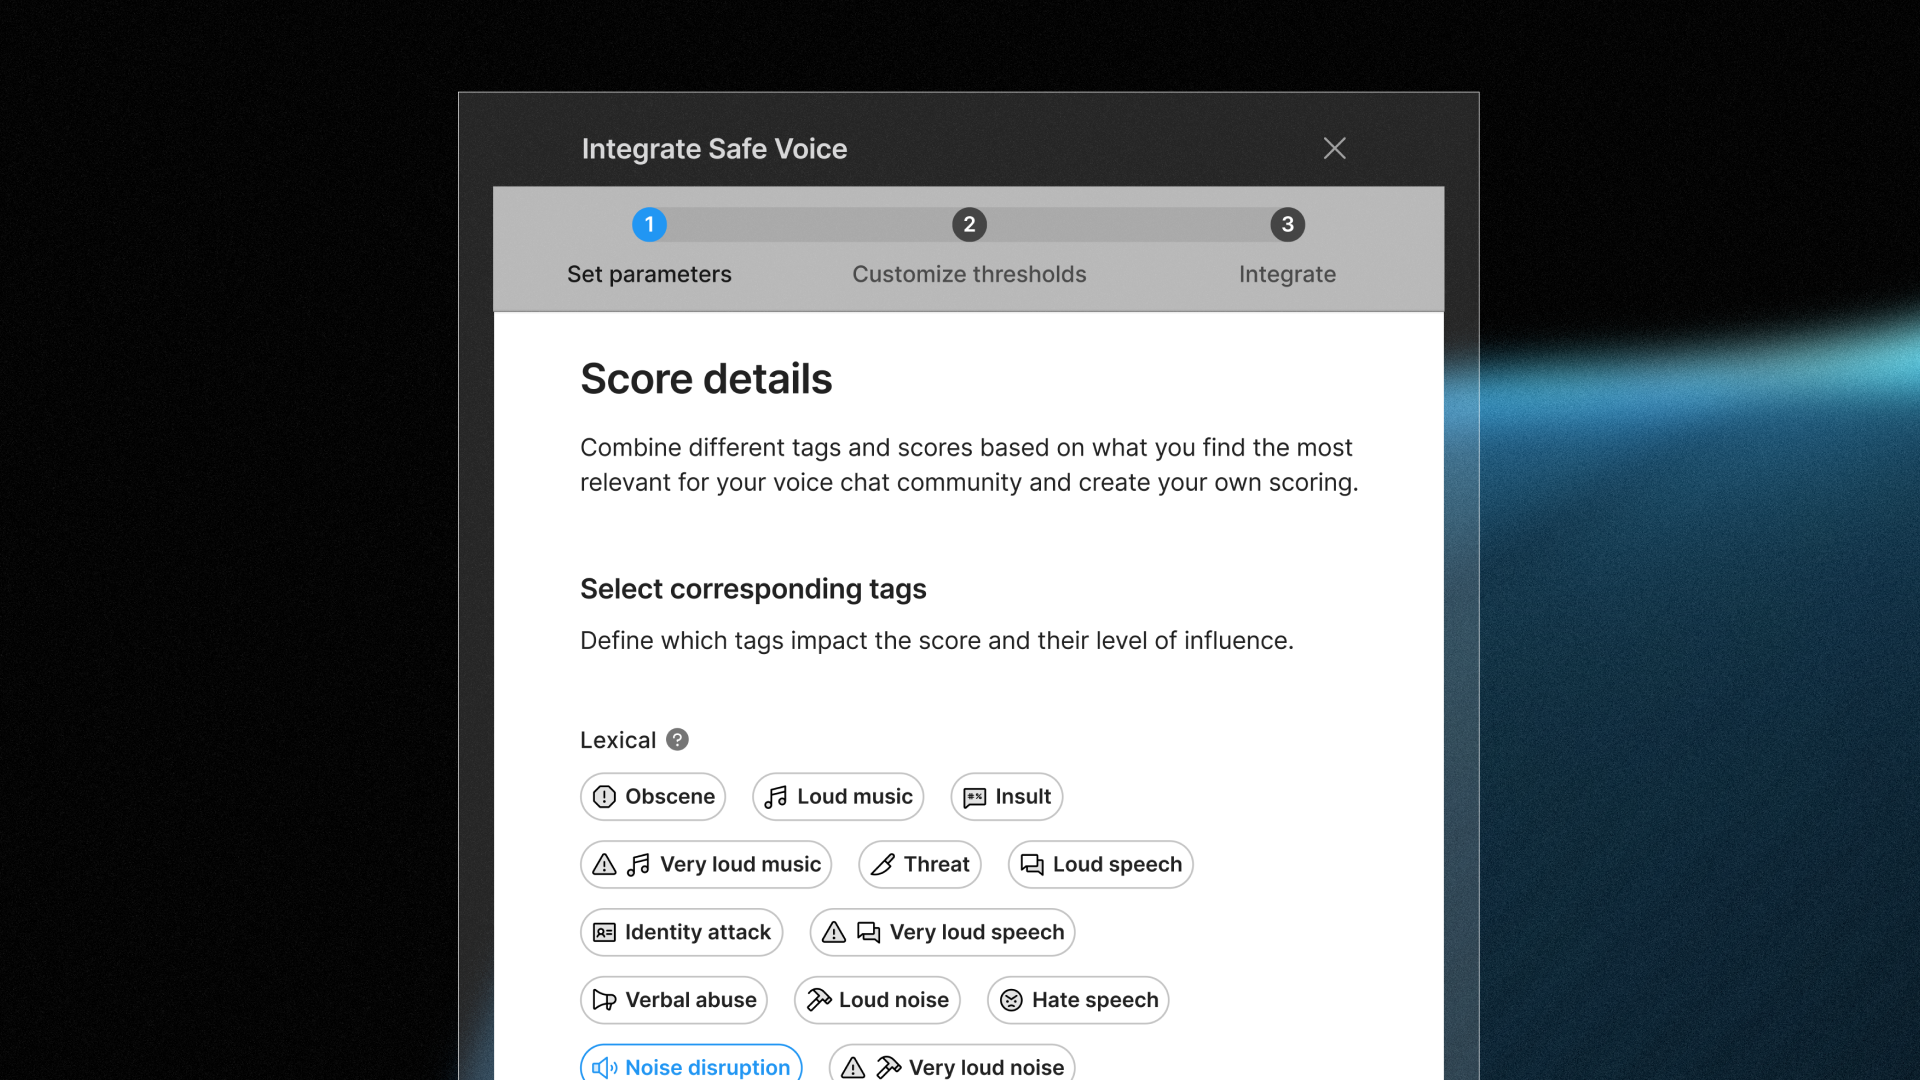 View of customizable toxicity scorecard within Unity Safe Voice 